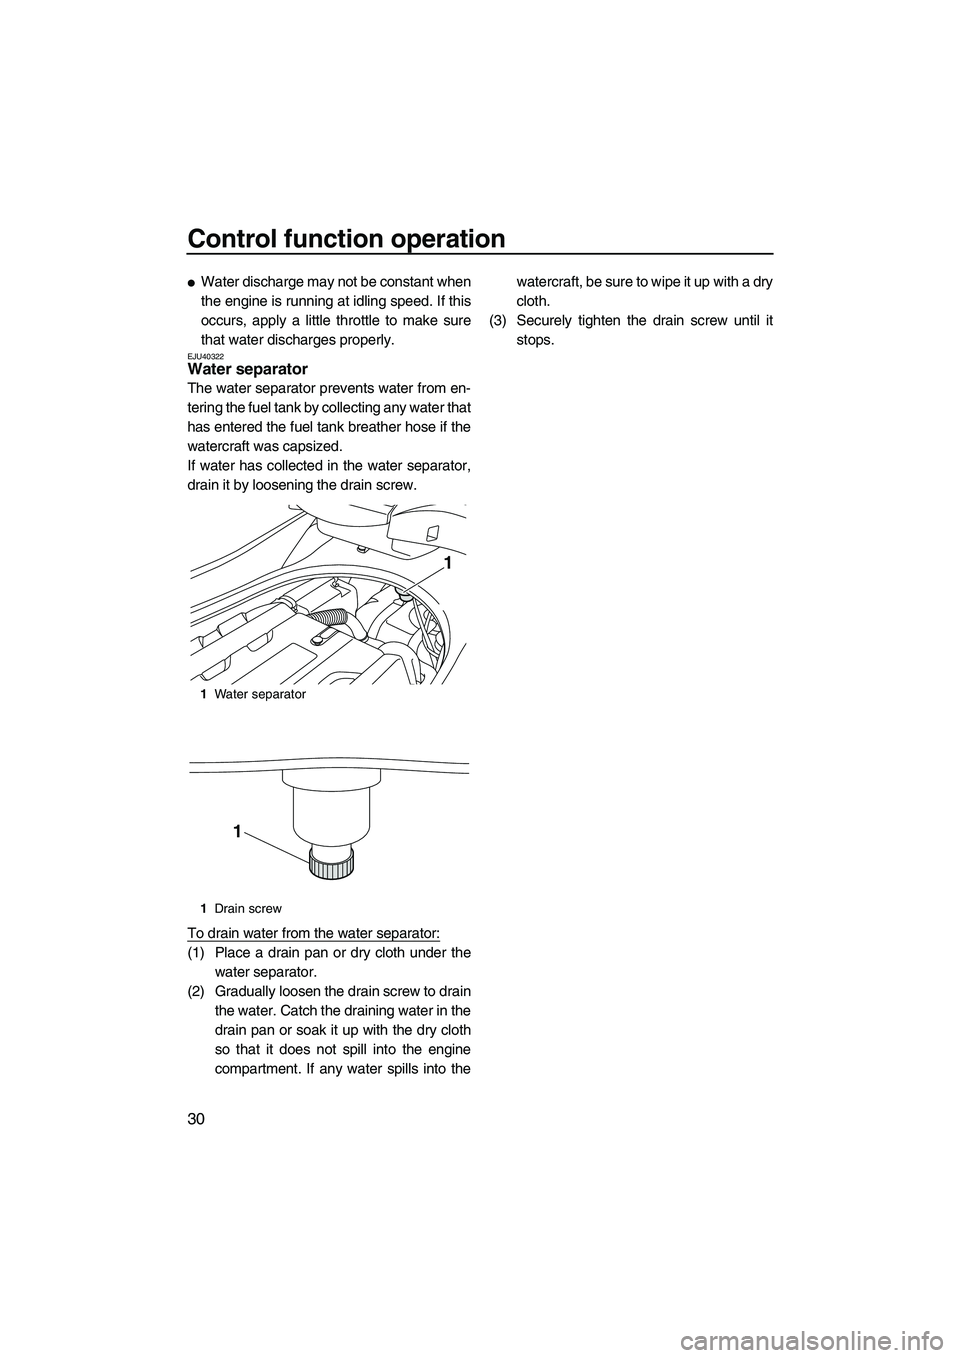 YAMAHA FZR 2012  Owners Manual Control function operation
30
Water discharge may not be constant when
the engine is running at idling speed. If this
occurs, apply a little throttle to make sure
that water discharges properly.
EJU4